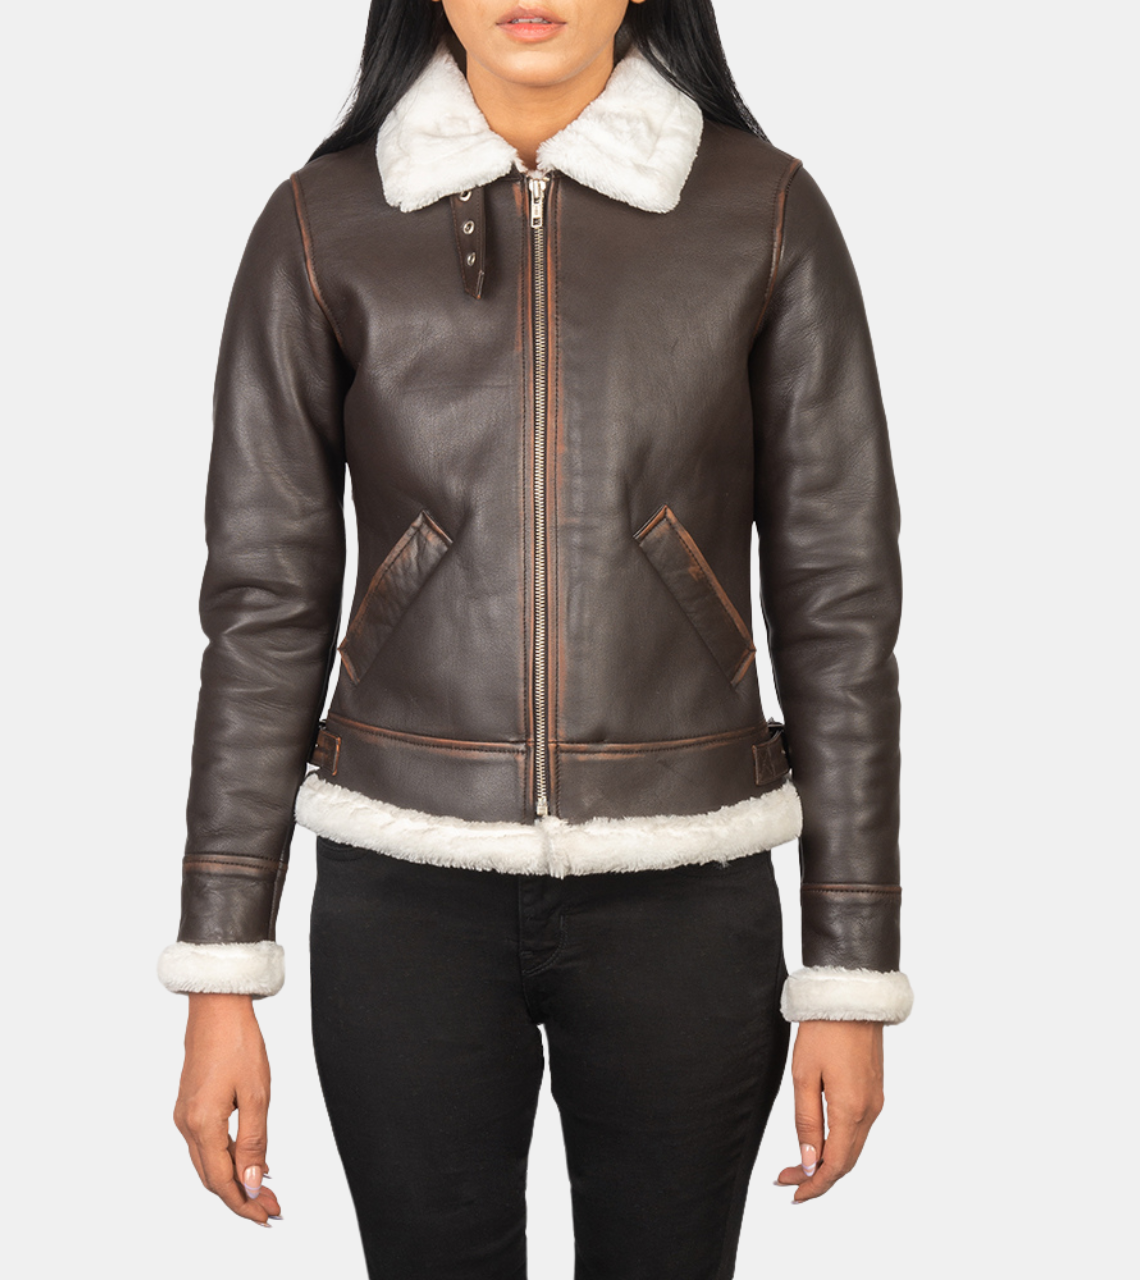  Maisiel Women's Brown Bomber Shearling Leather Jacket 